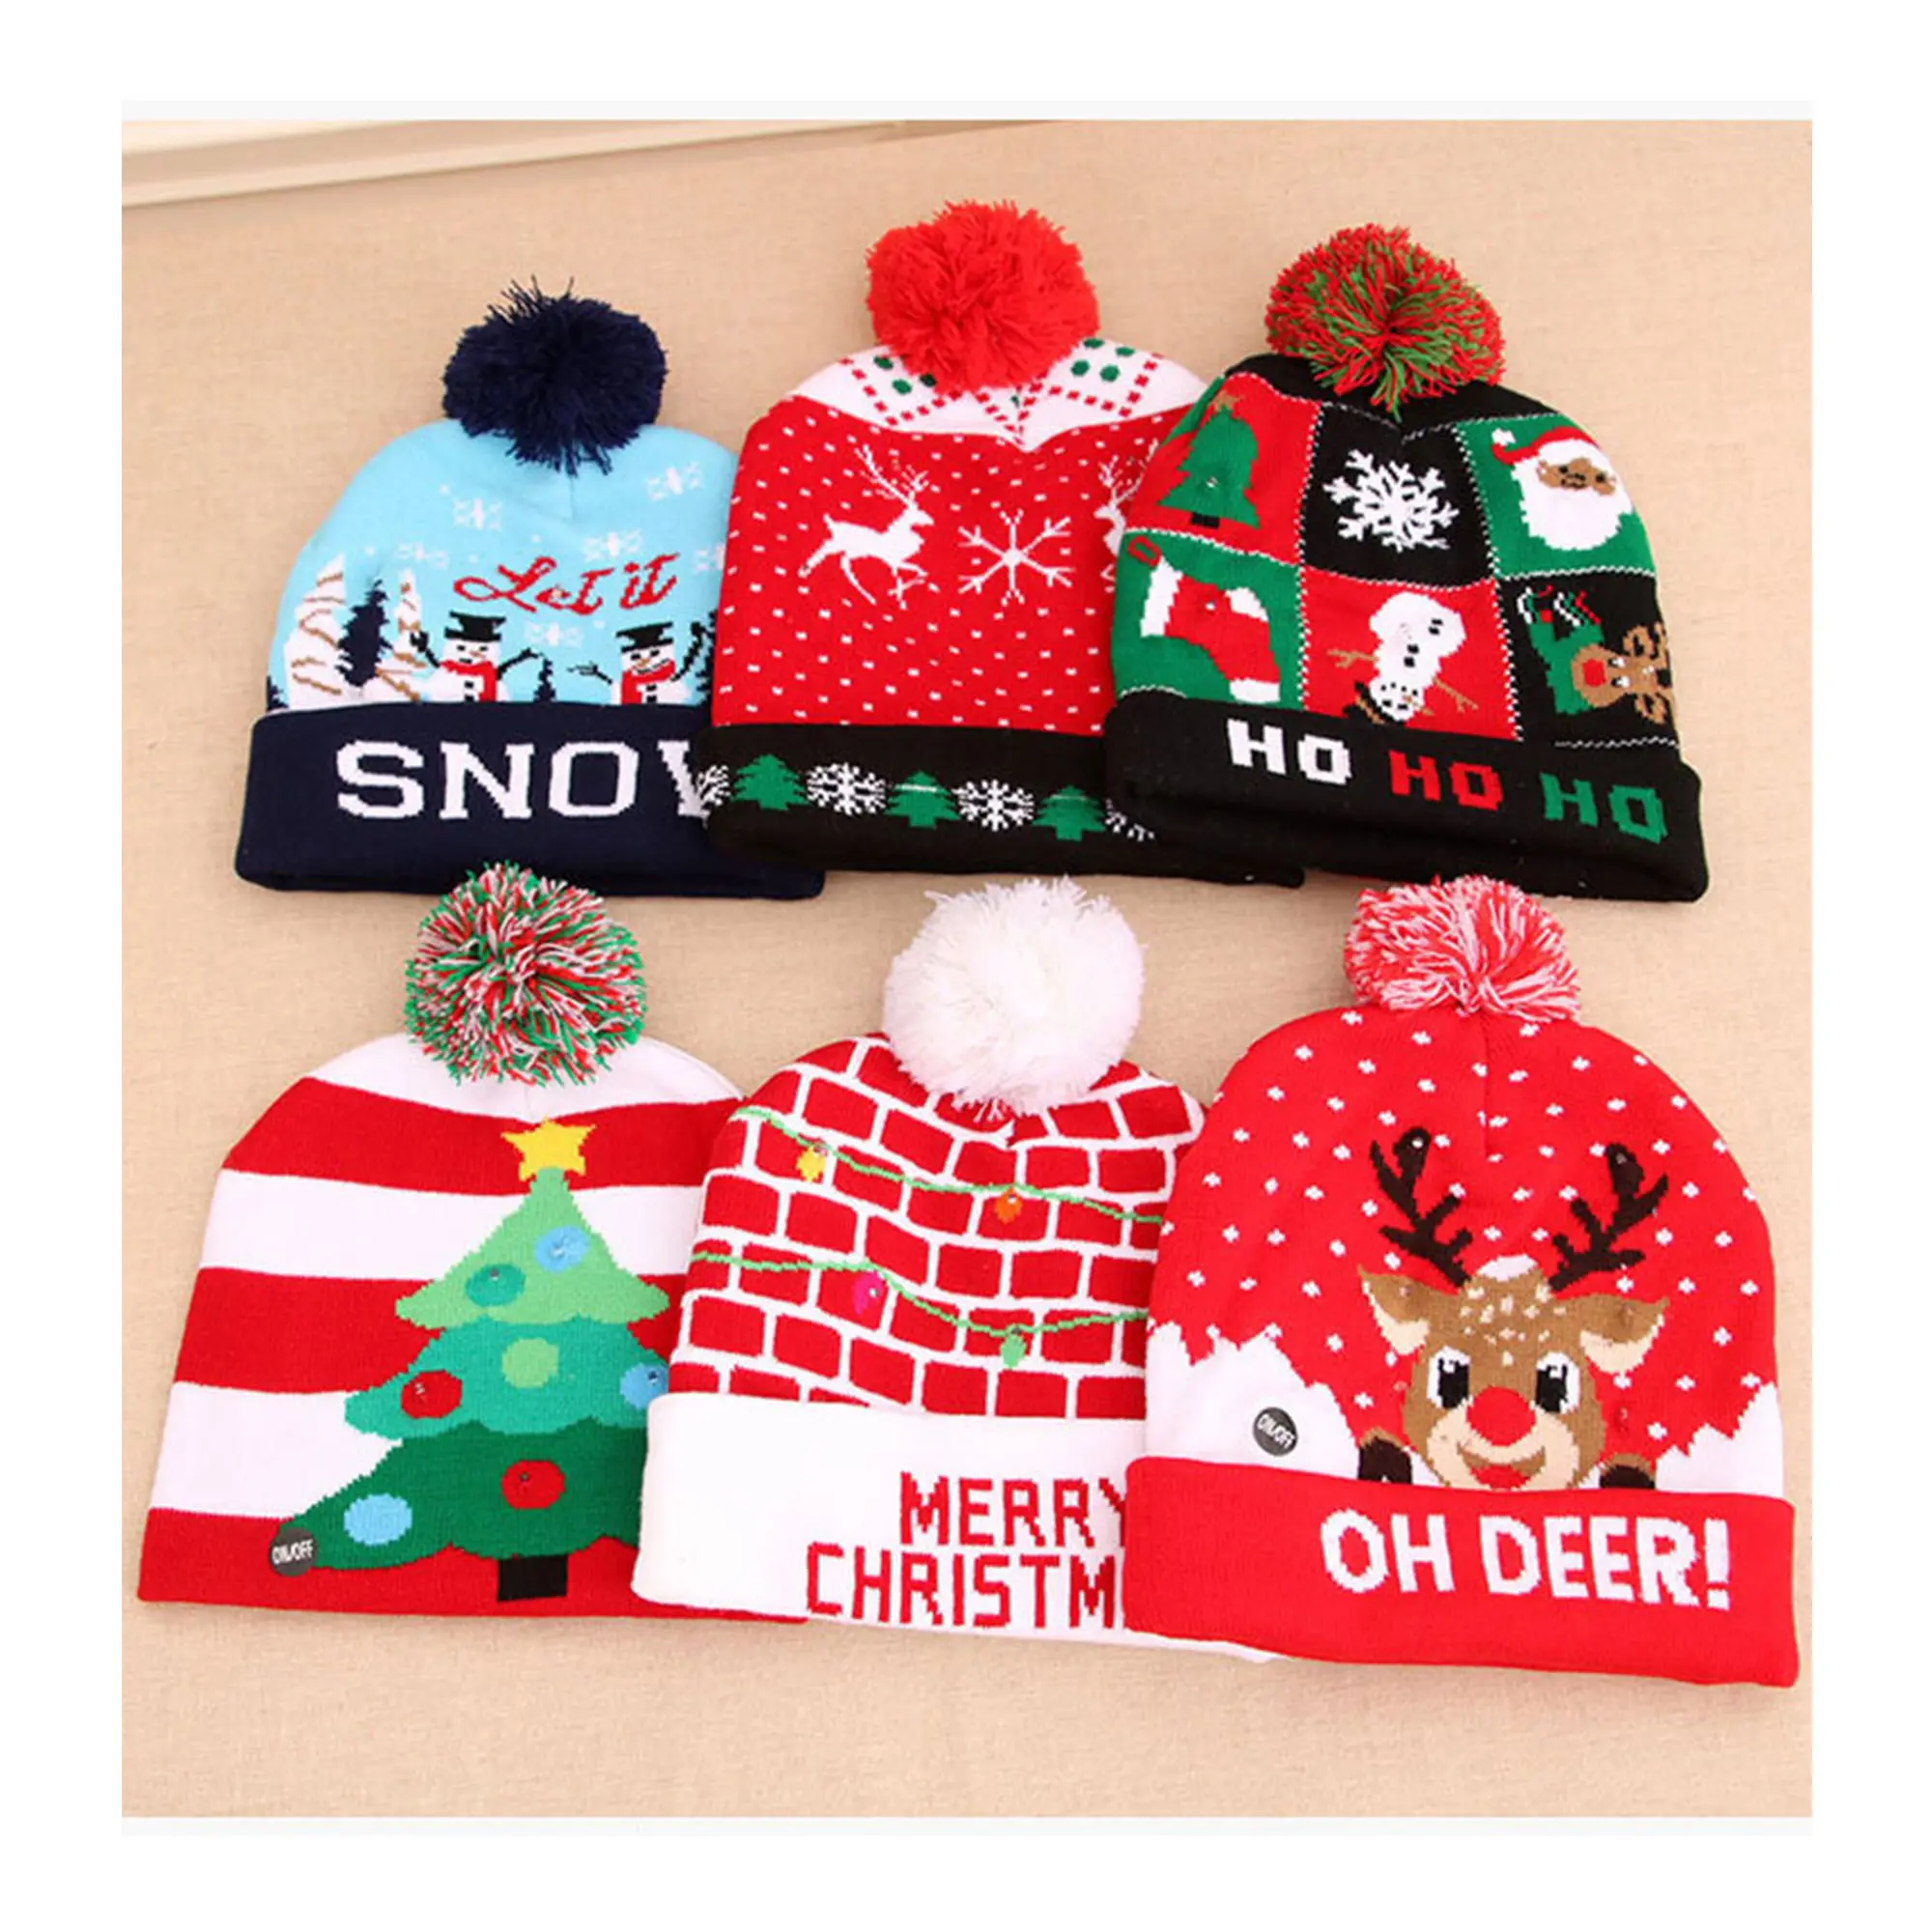 Nicro Cowinner Christmas Colorful LED Light Up Hat Beanie Knit Hat LED Xmas Christmas Beanie Holiday Party Beanie Gifts